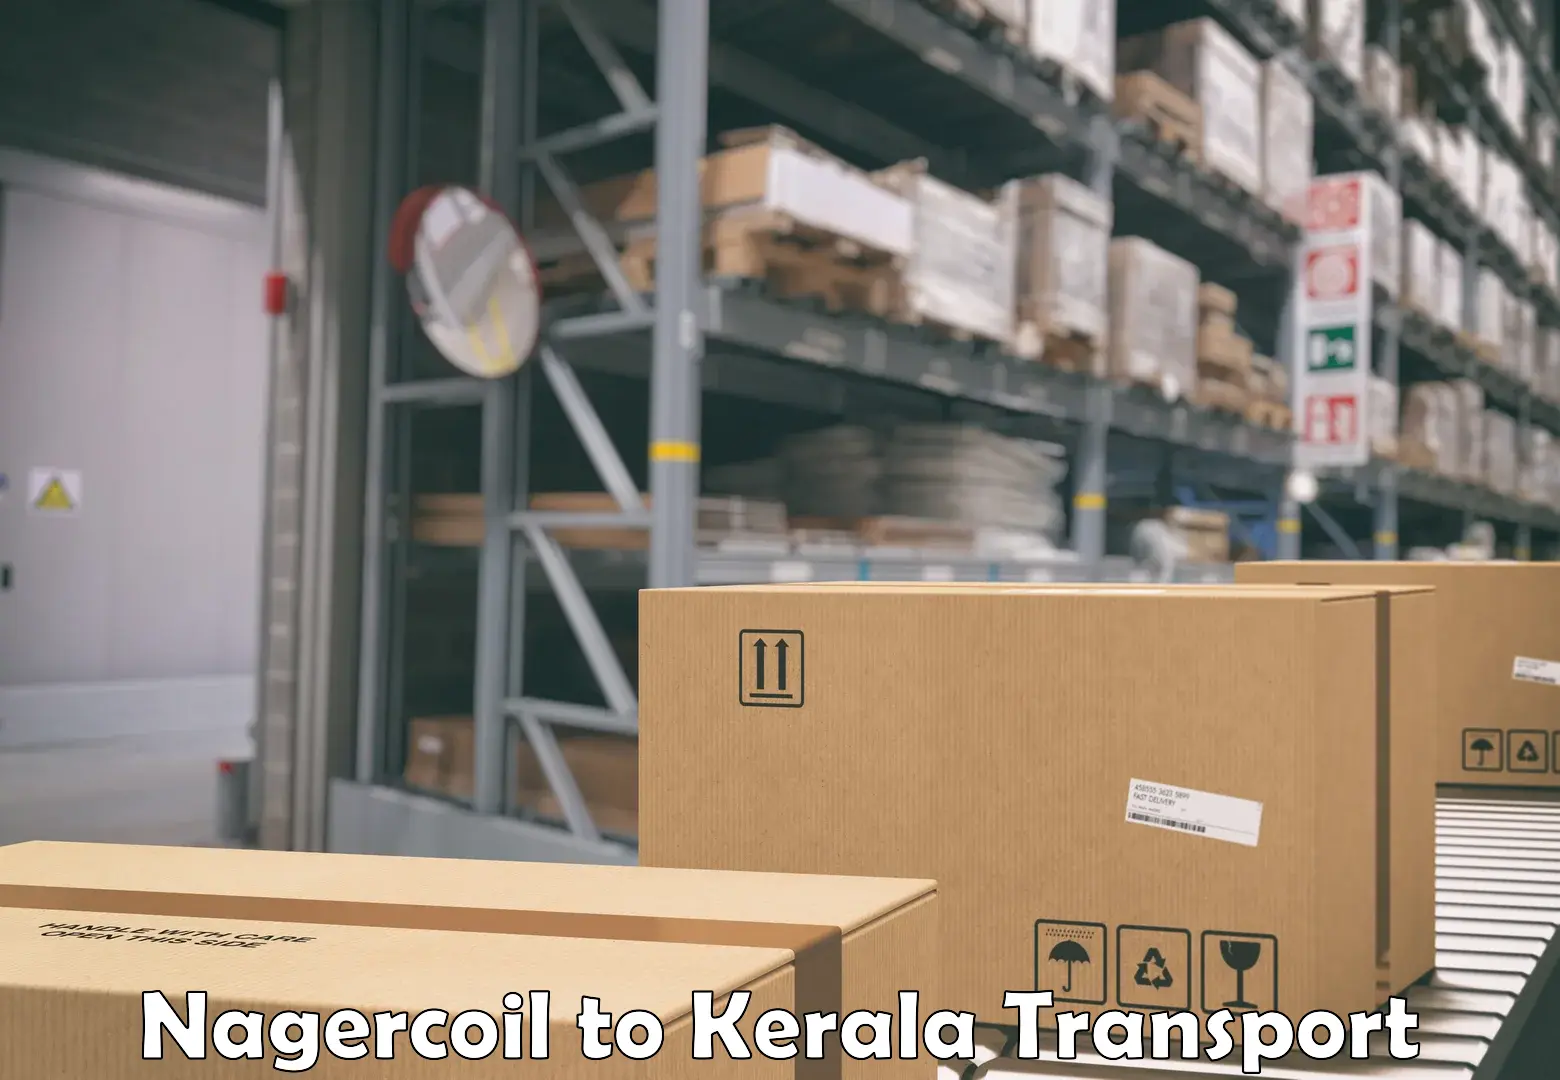 Air freight transport services Nagercoil to Karukachal